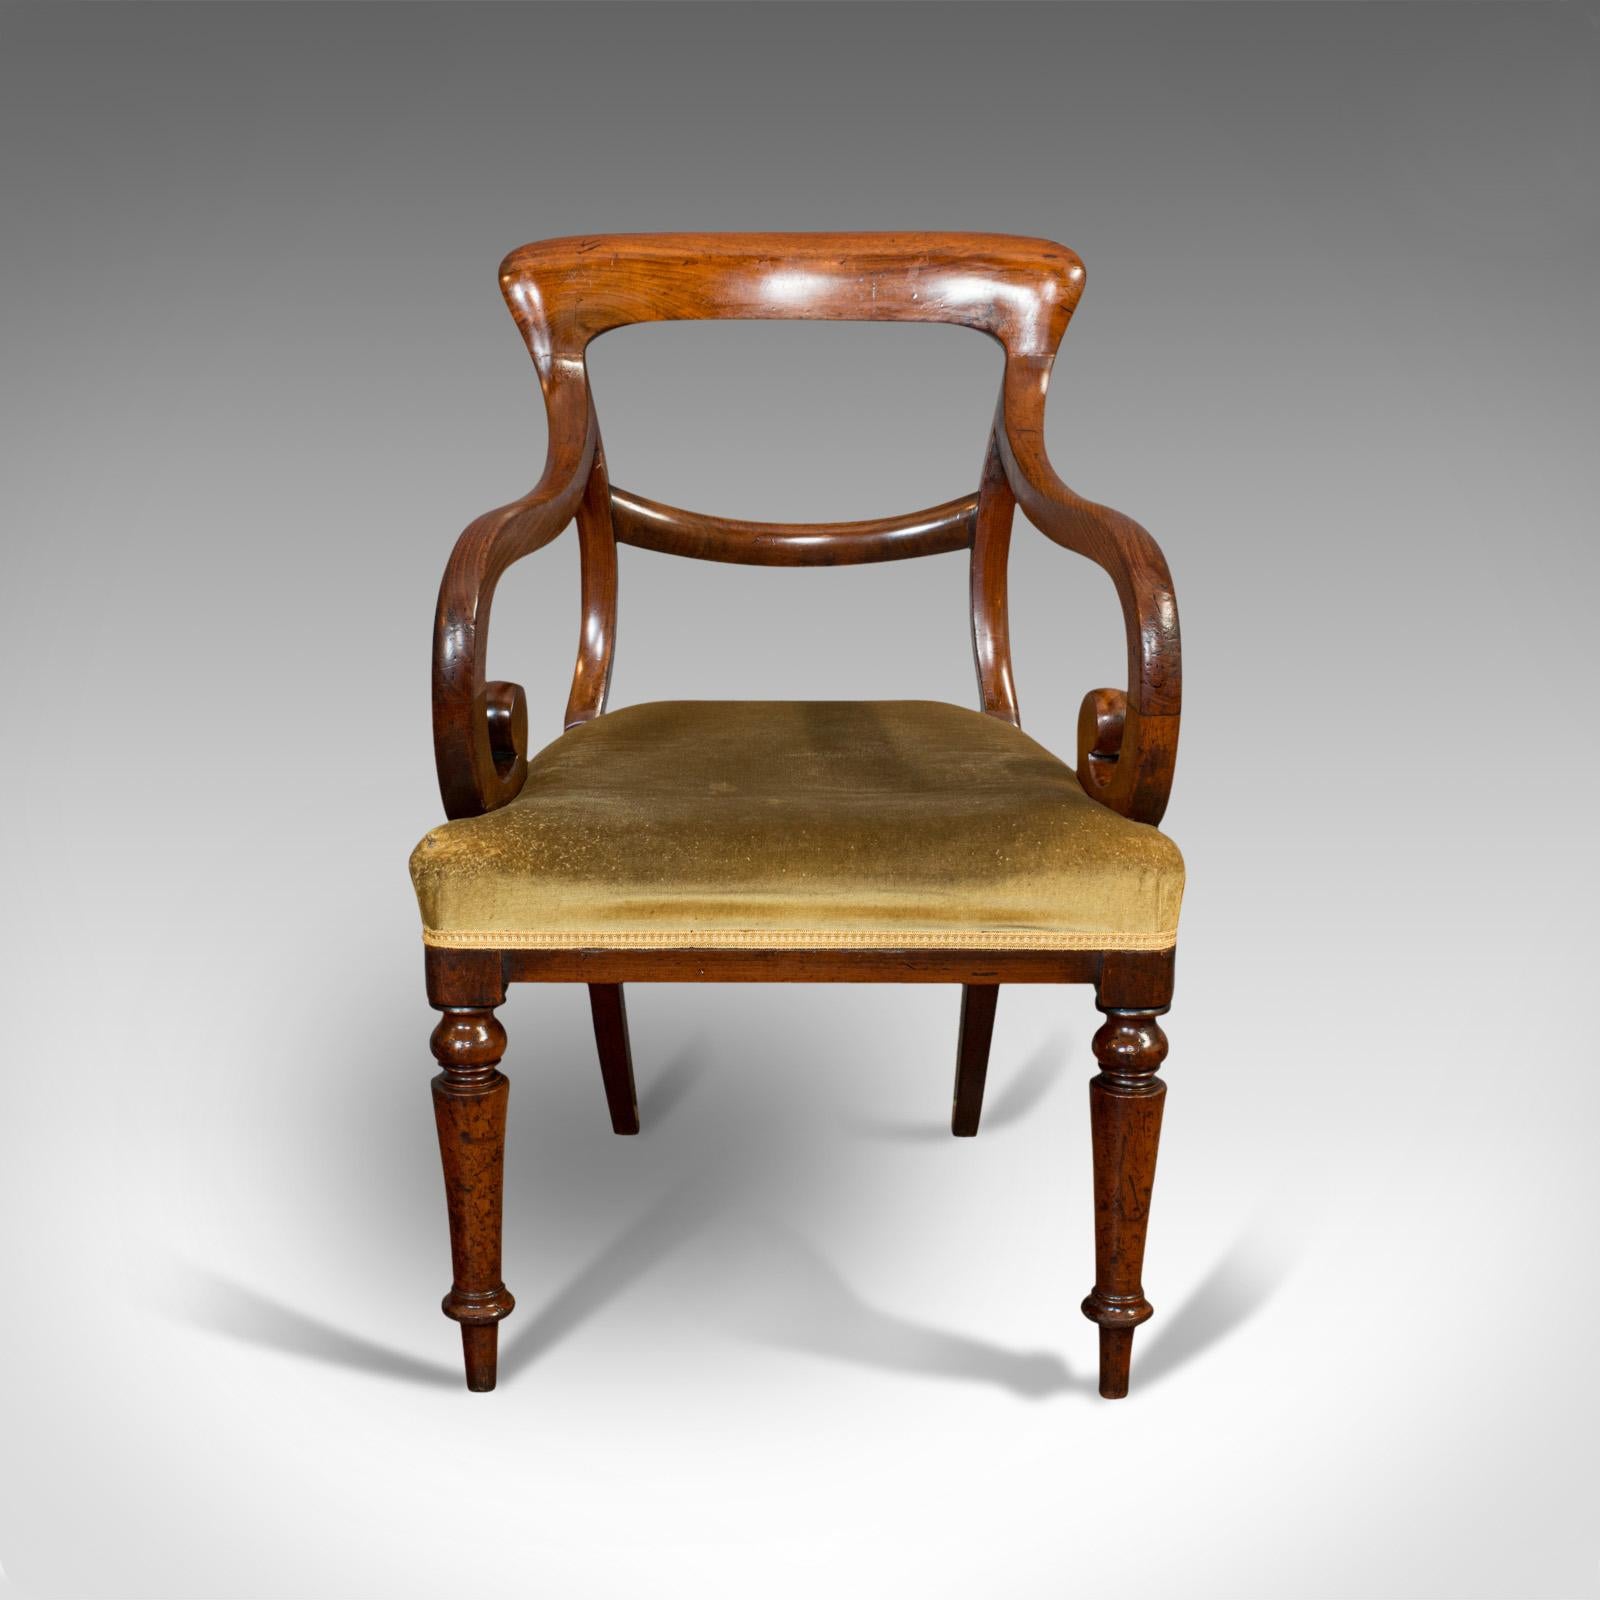 This is an antique serpentine armchair. An English, mahogany elbow seat, dating to the Regency period, circa 1820.

Attractive arm chair with alluring shape
Displays a desirable aged patina — some small marks to upholstery under closer